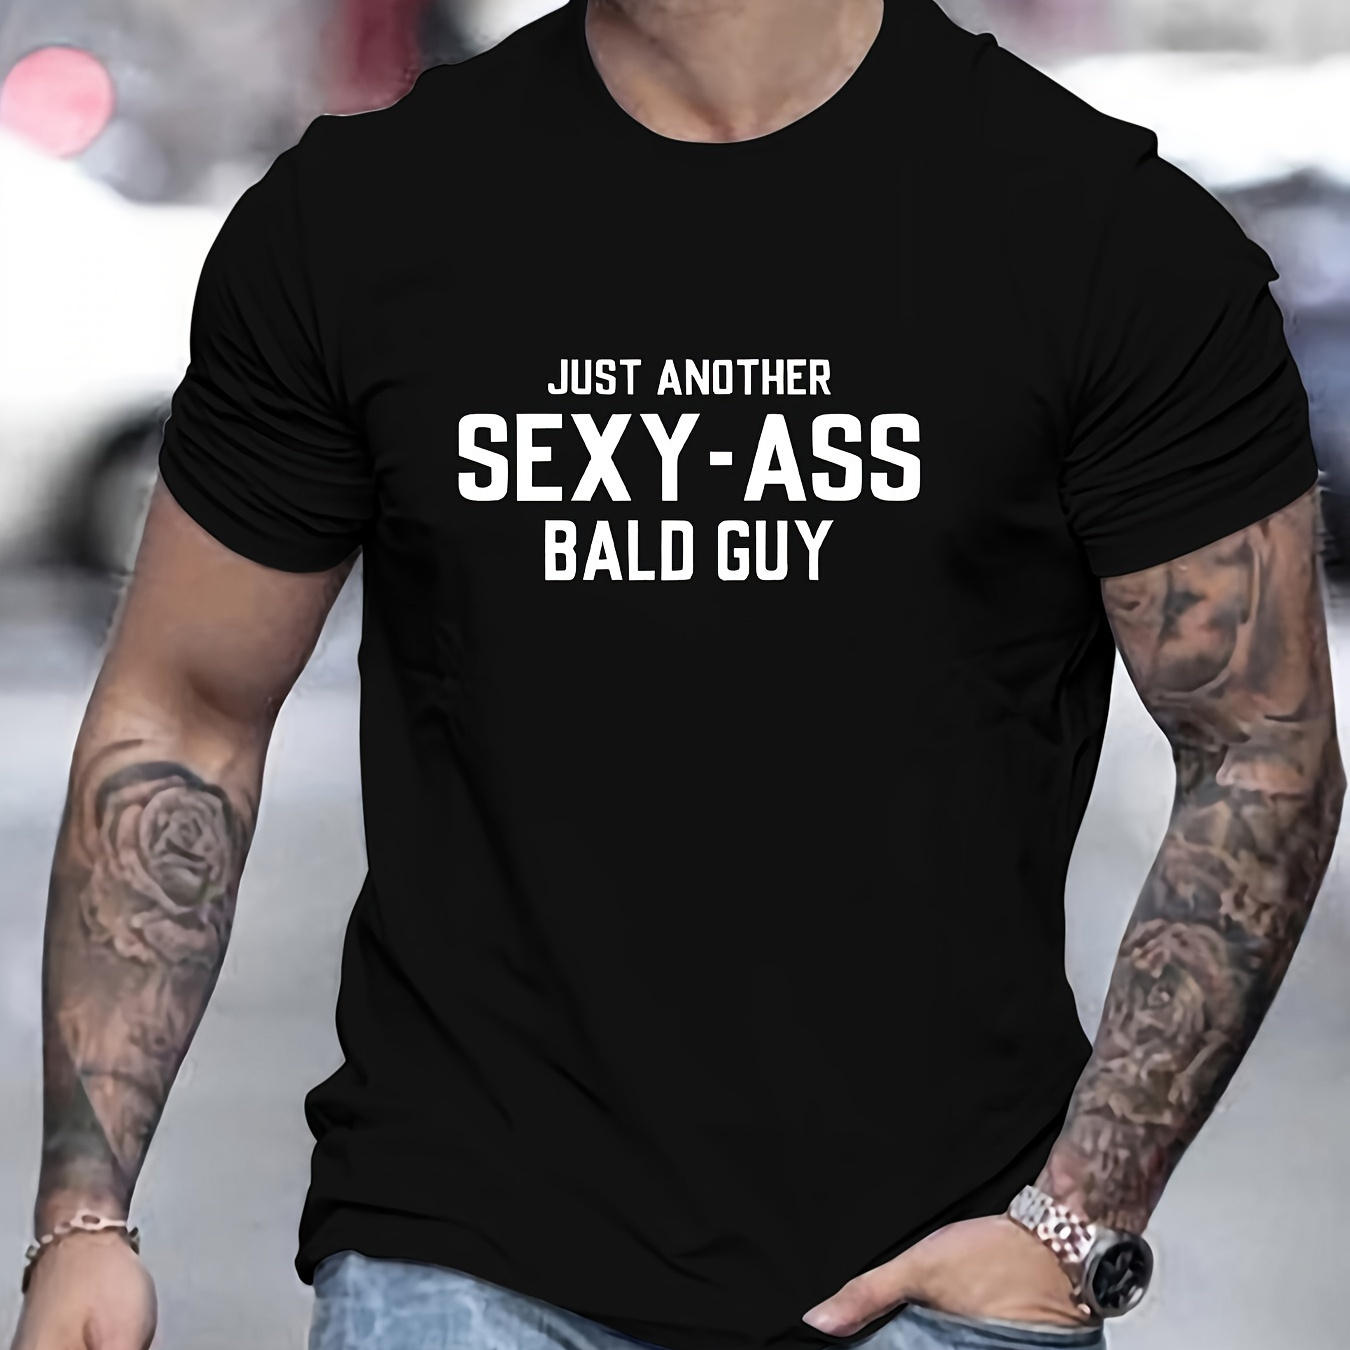 

Just Another Sexy Ass Bald Guy Print T Shirt, Tees For Men, Casual Short Sleeve T-shirt For Summer